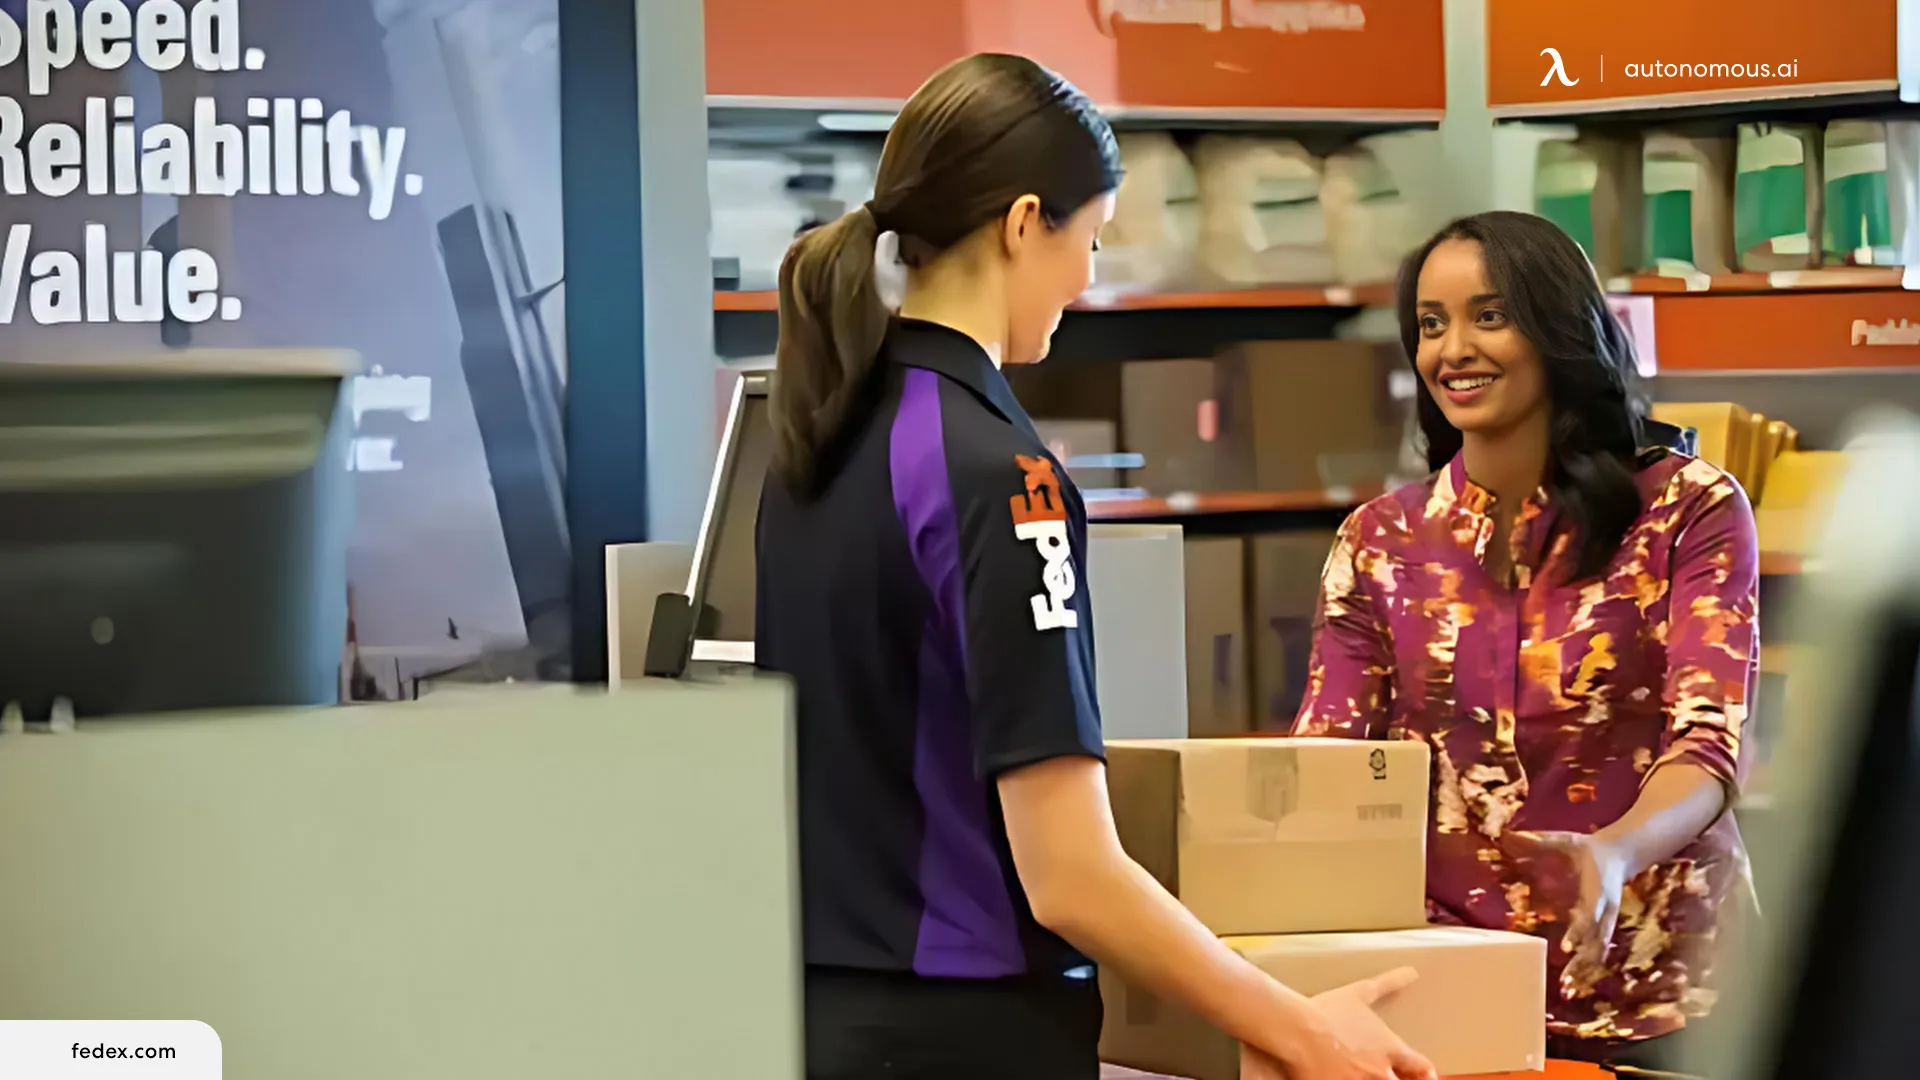 Savings with AT&T - FedEx employee benefits